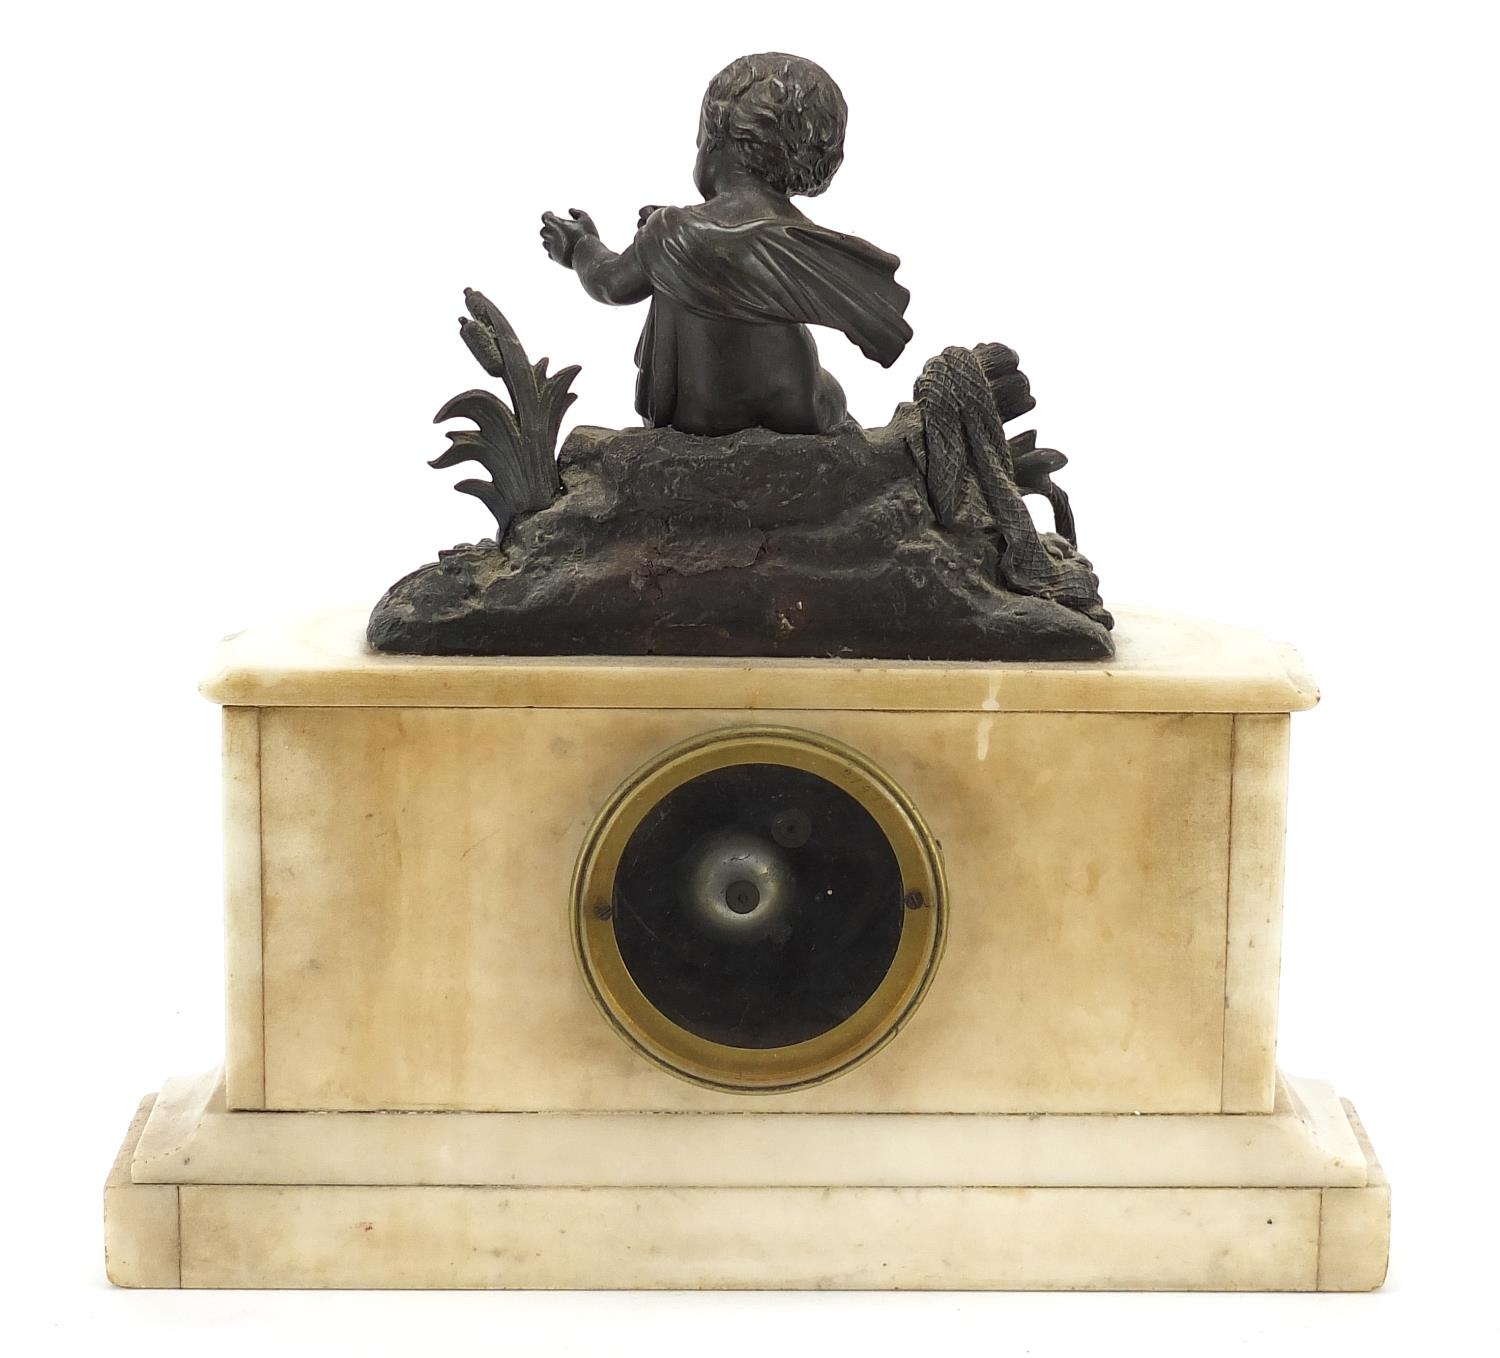 19th century French white marble mantle clock striking on a bell, surmounted with a bronzed figure - Image 9 of 16